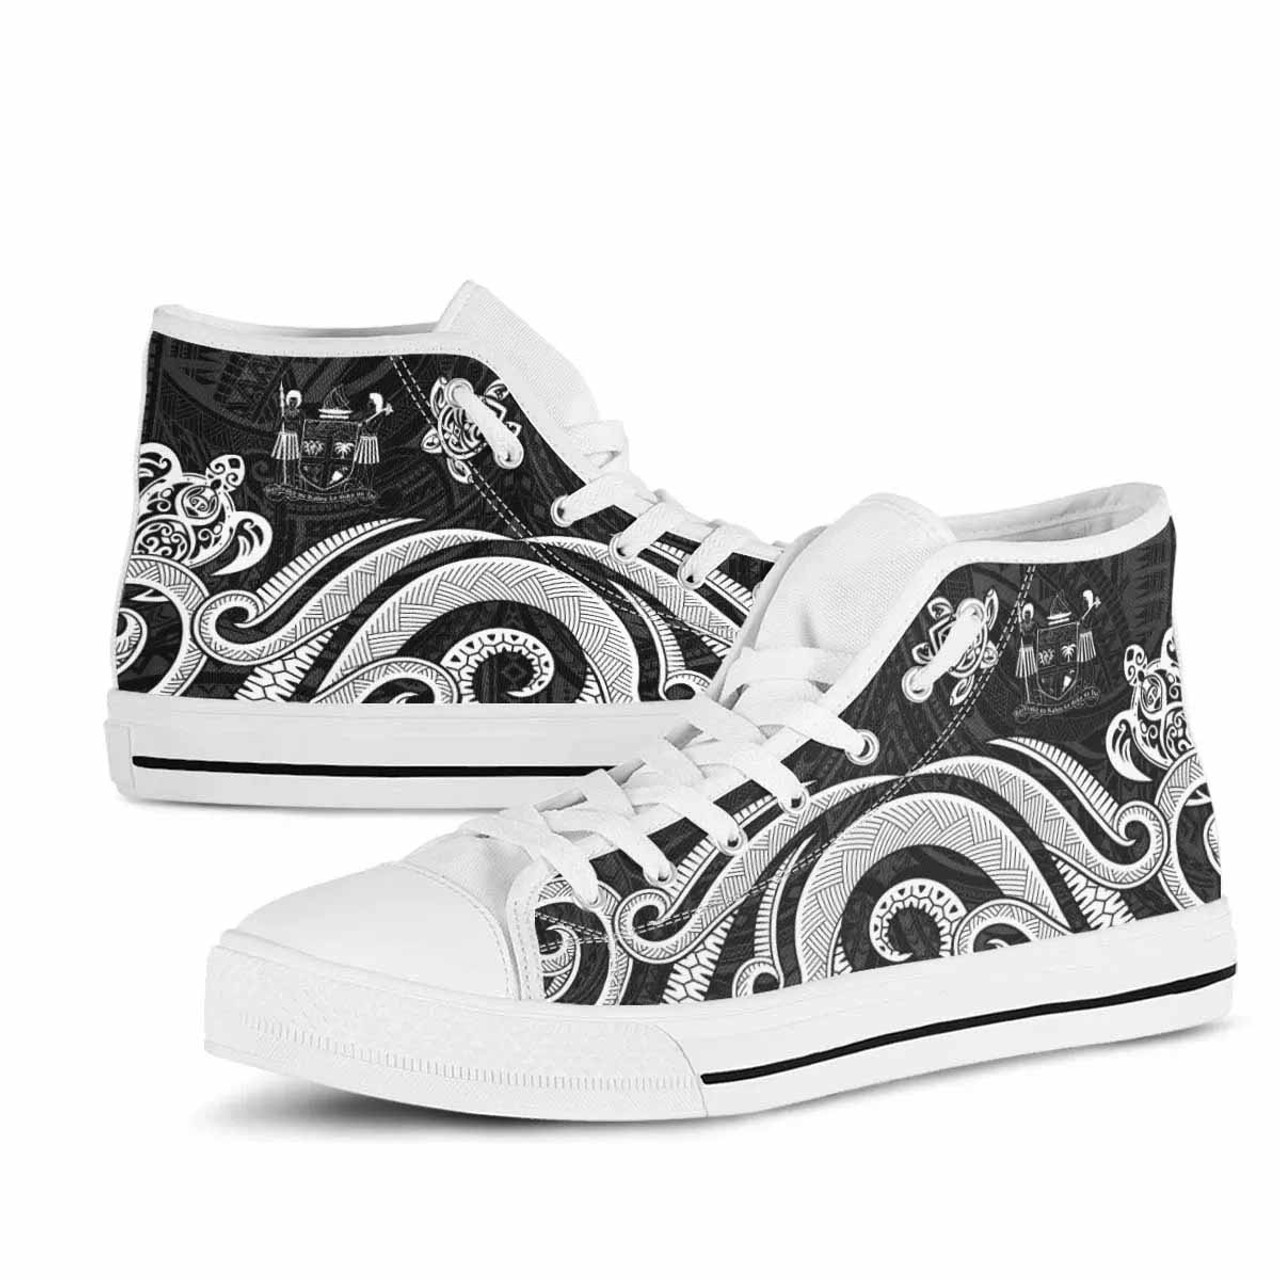 Fiji High Top Shoes - White Tentacle Turtle Crest 10